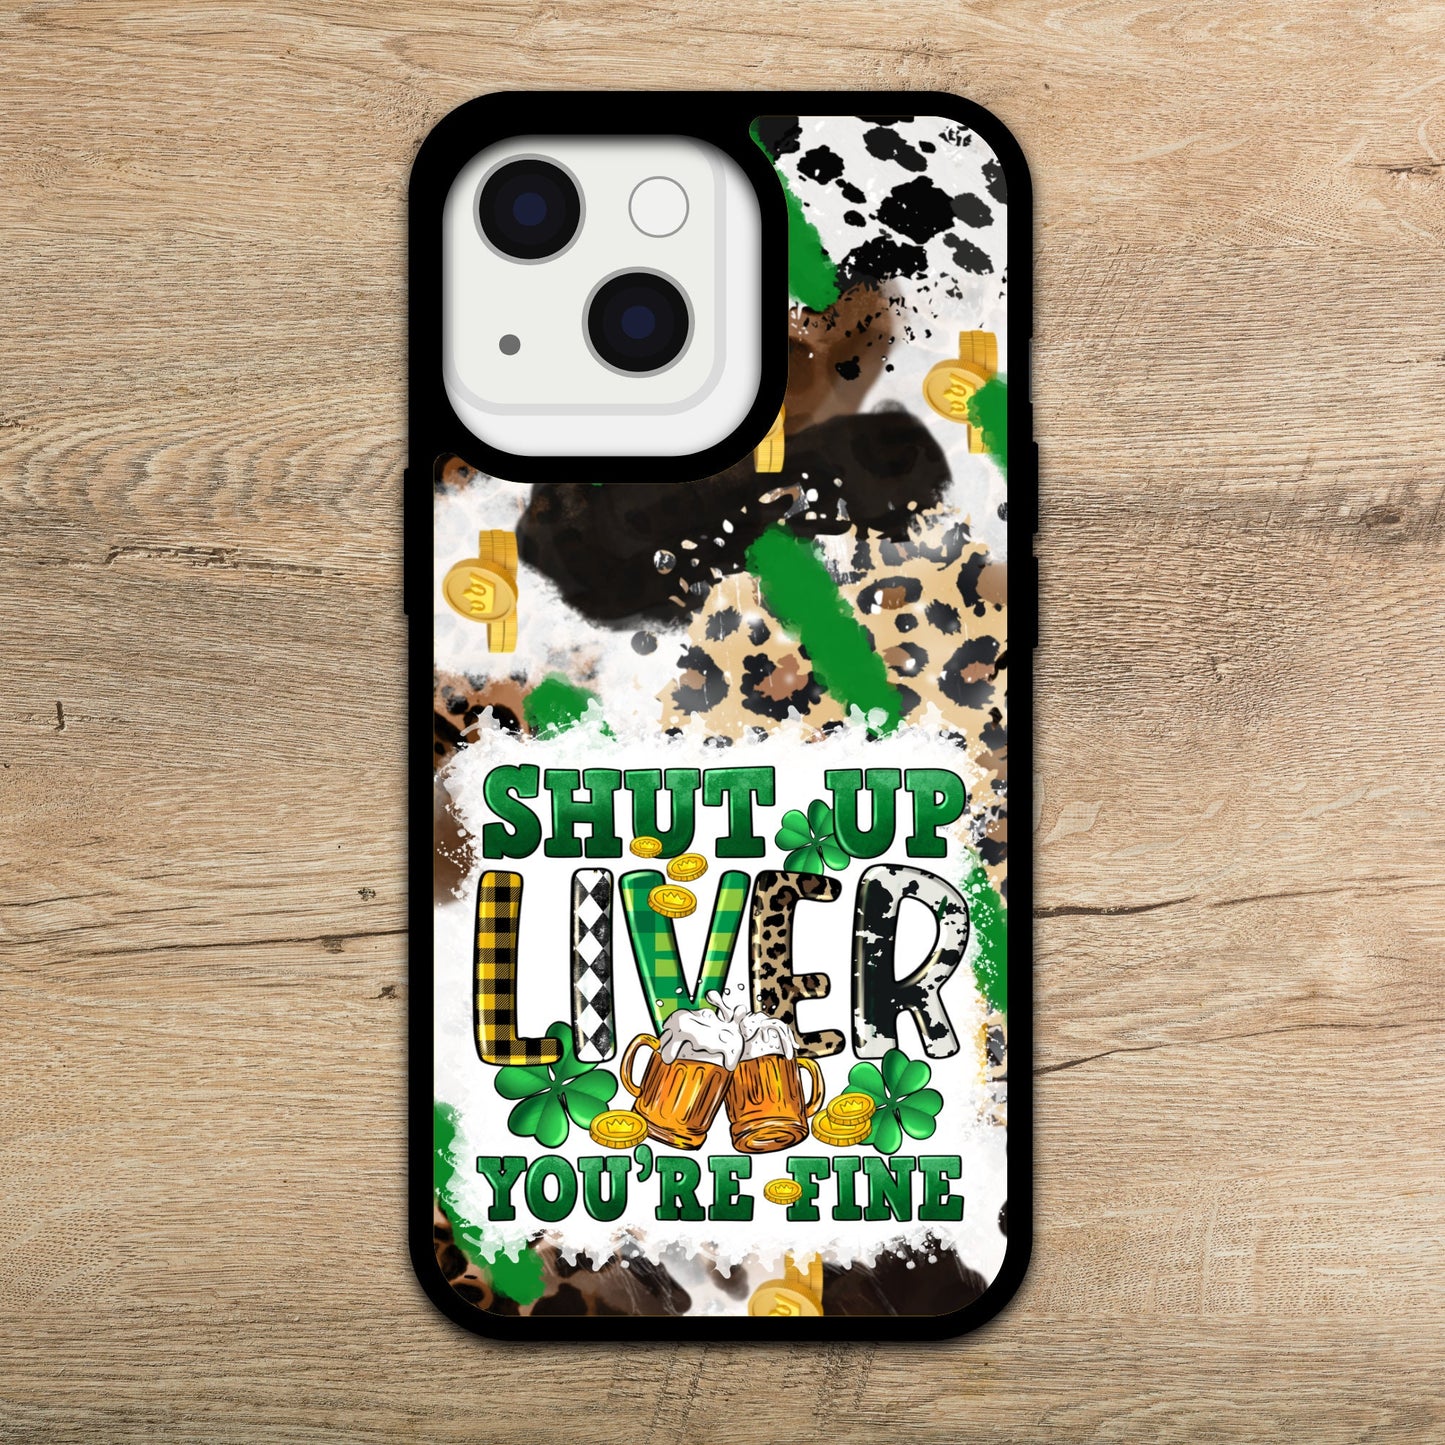 SHUT UP LIVER/St. Patrick's Design Phone Case/ Cover/ Cell Phone Cases Black Edge Cover /Compatible with Iphone and Samsung